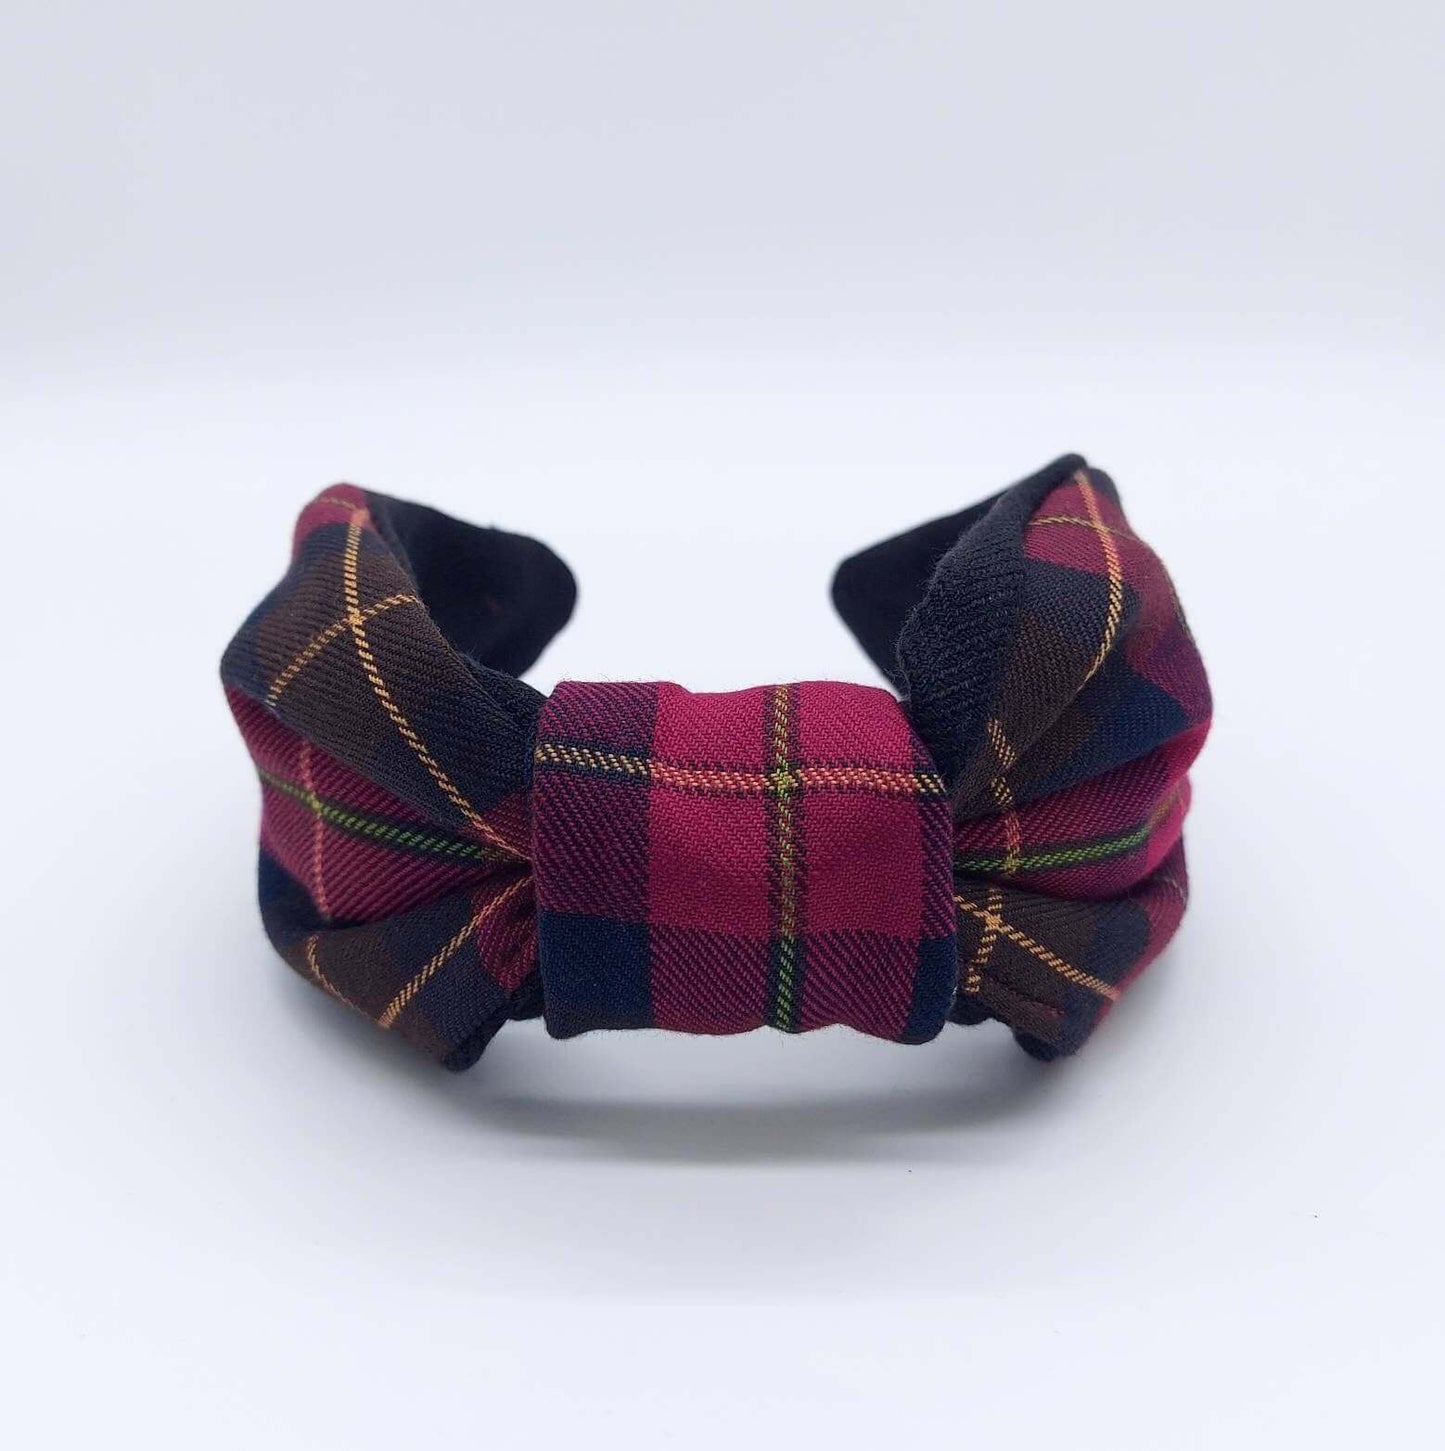 A bow-style, brown and red tartan plaid fabric knot headband with plain black lining underneath.